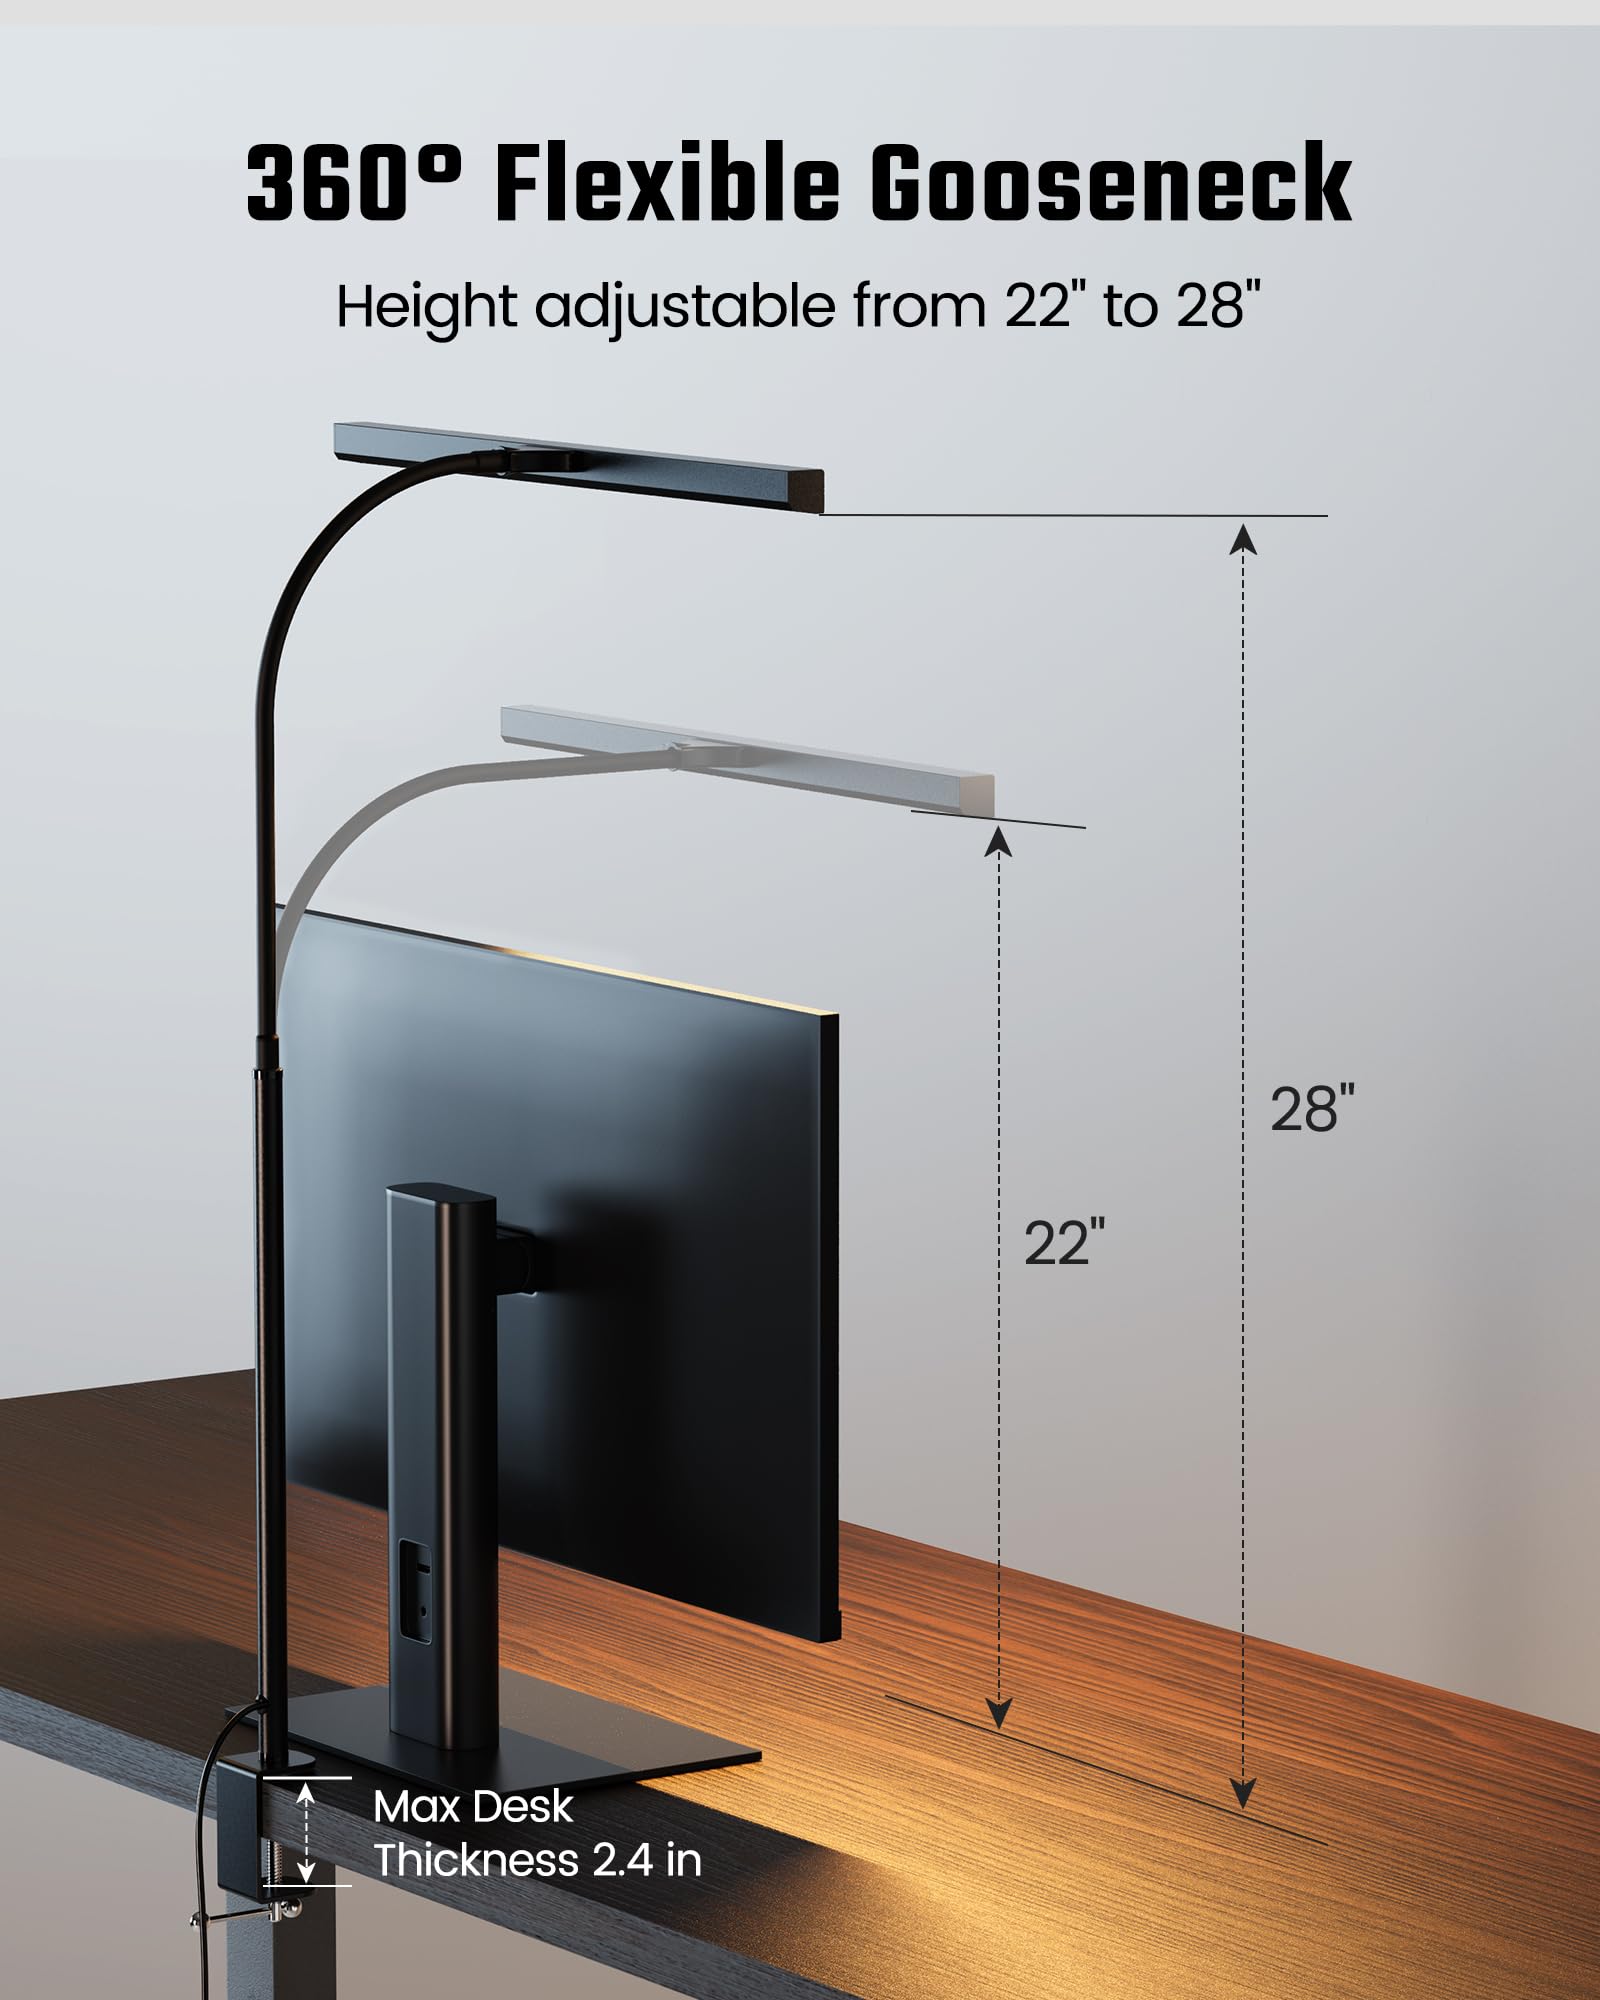 SUPERDANNY LED Desk Lamp for Office Home, Eye-Caring Desk Light with Adjustable Gooseneck, 12W Touch Control Dimmable Brightness, Architect Clamp Lamp with USB Adapter for Reading Study Workbench